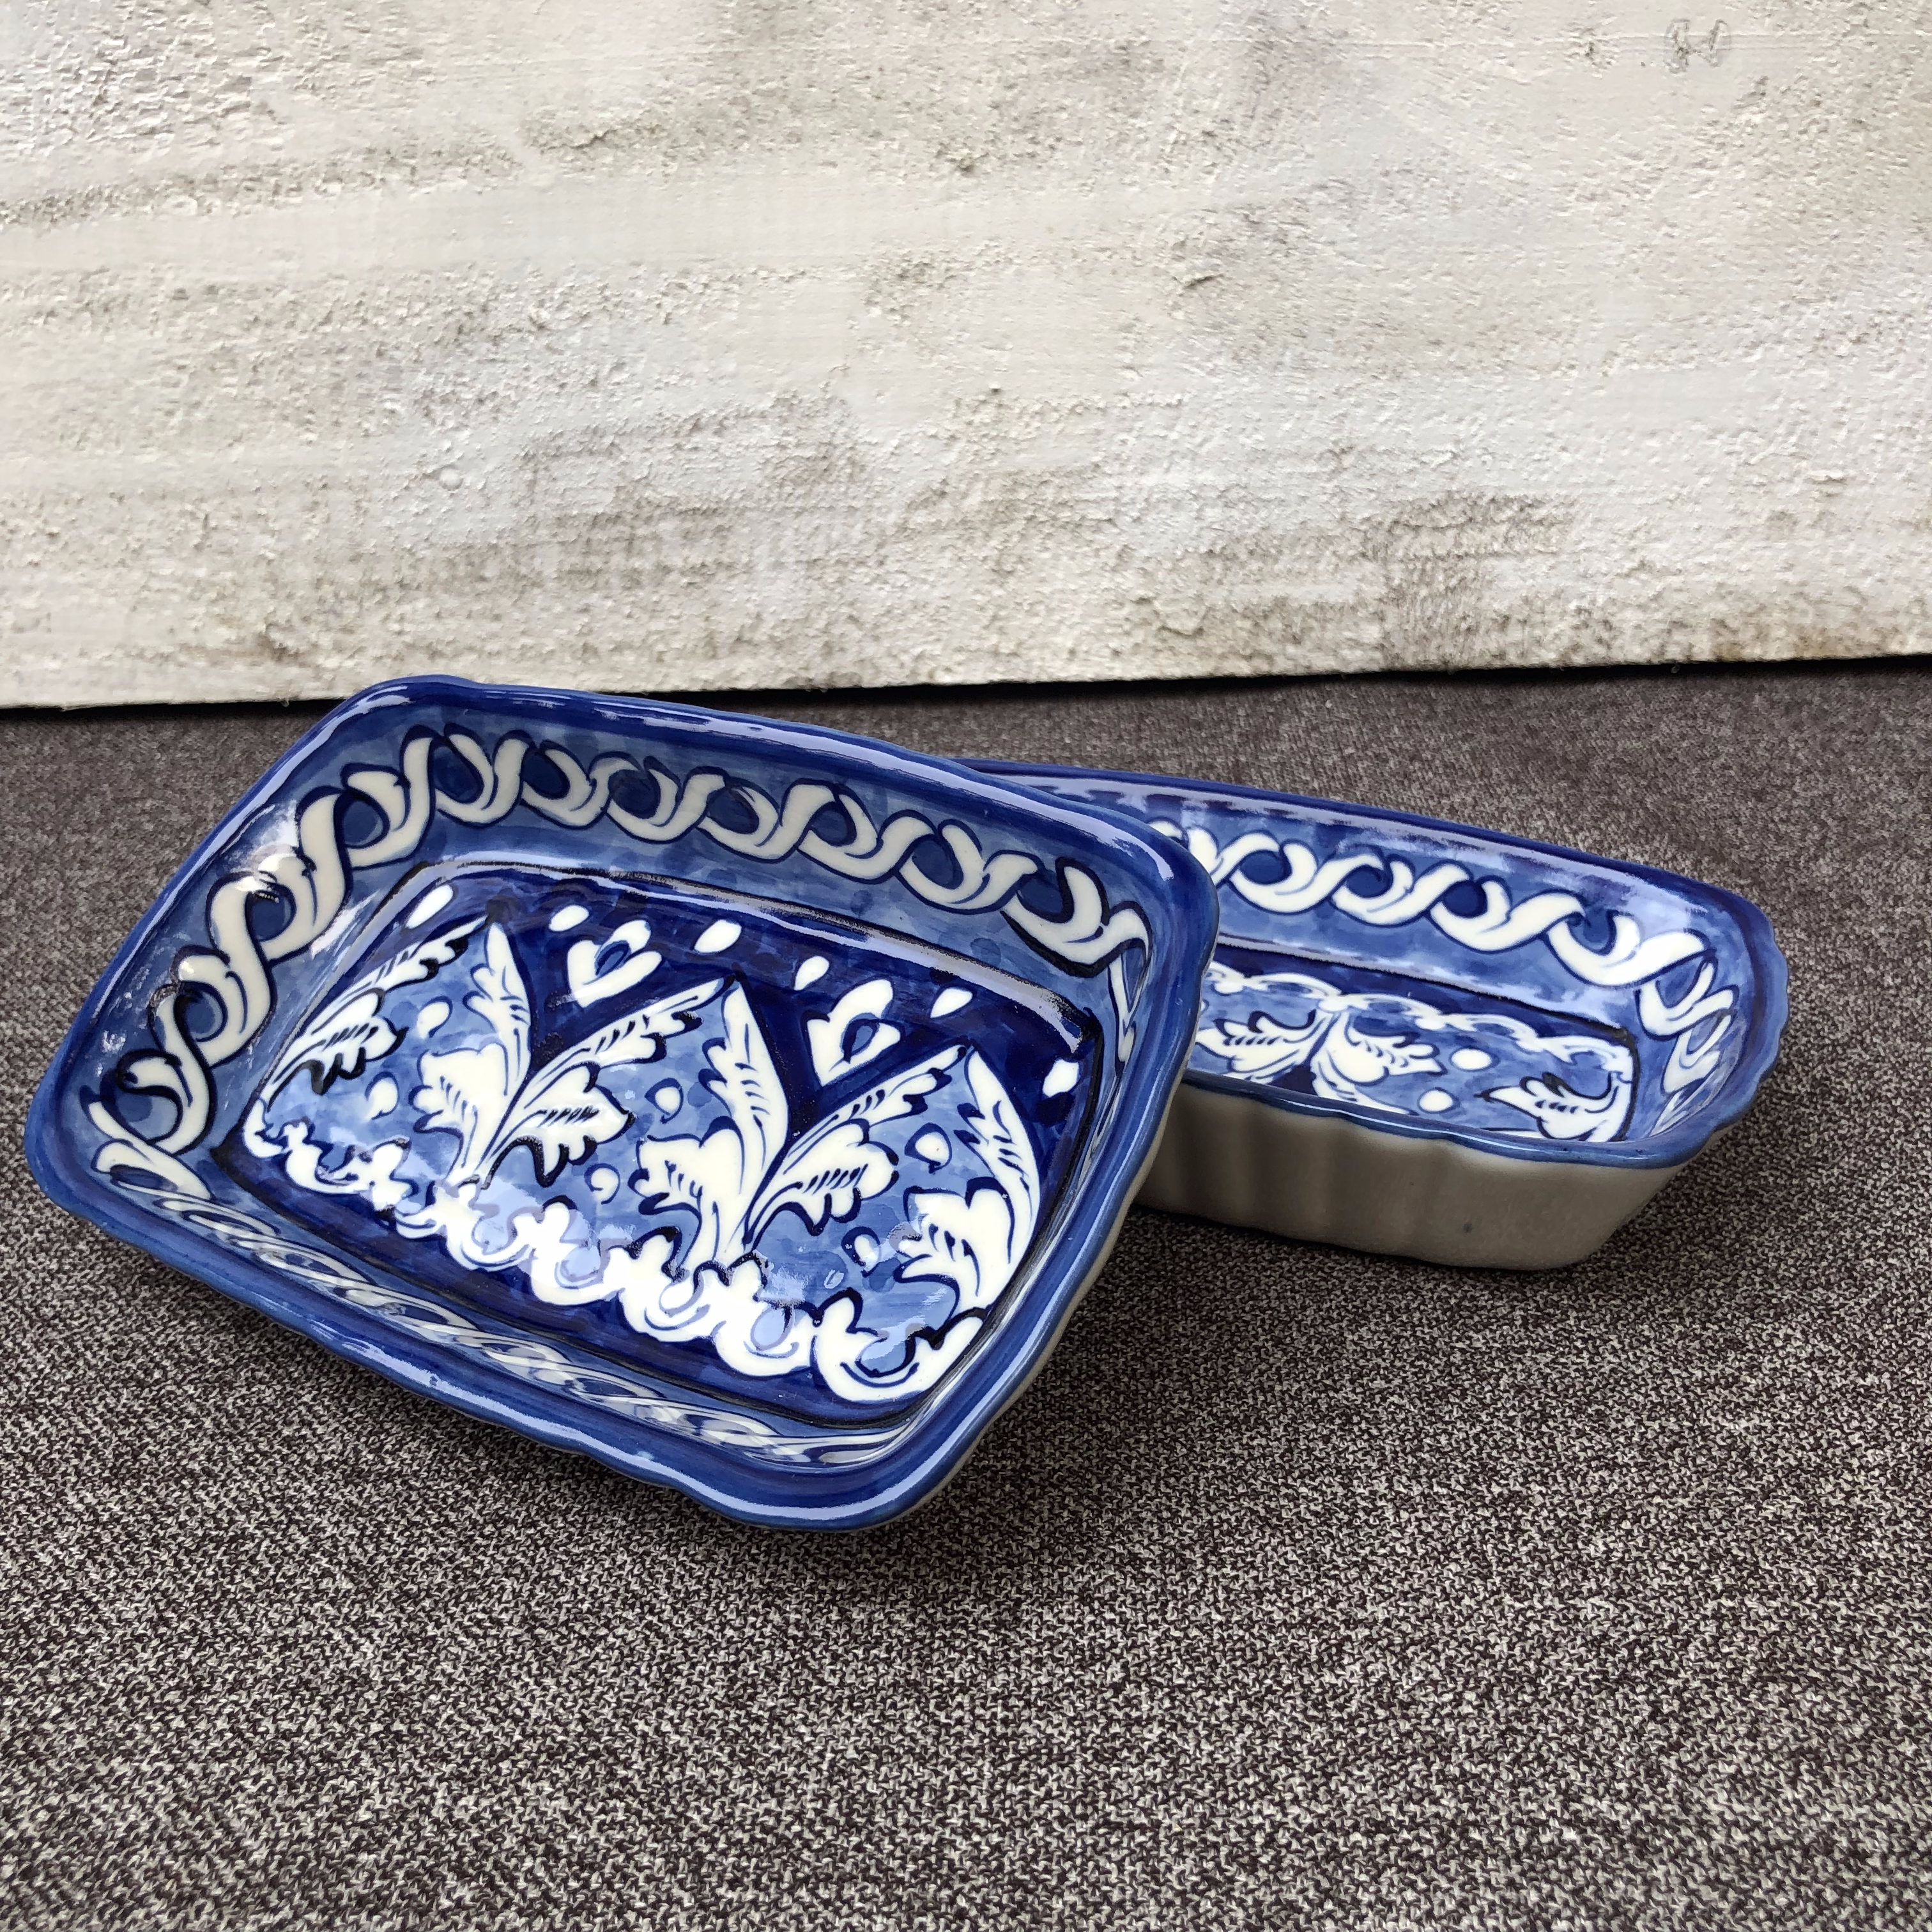 Blue Felicity Small Serving Dish - Set of 2